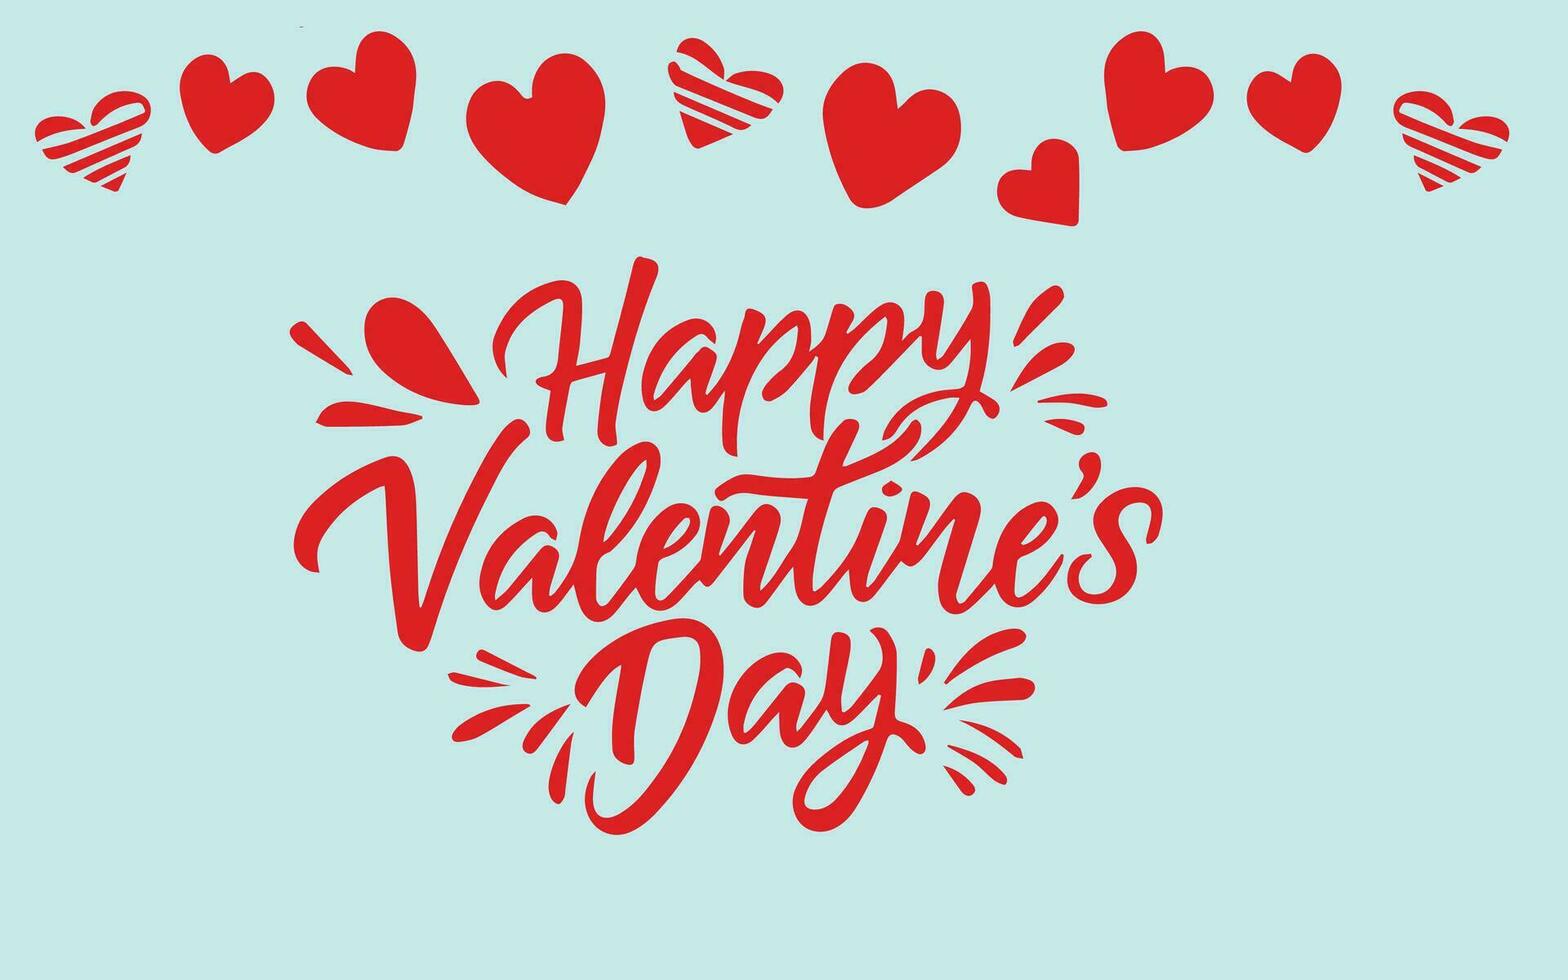 hand lettering happy valentines day greetings text with heart shapes vector